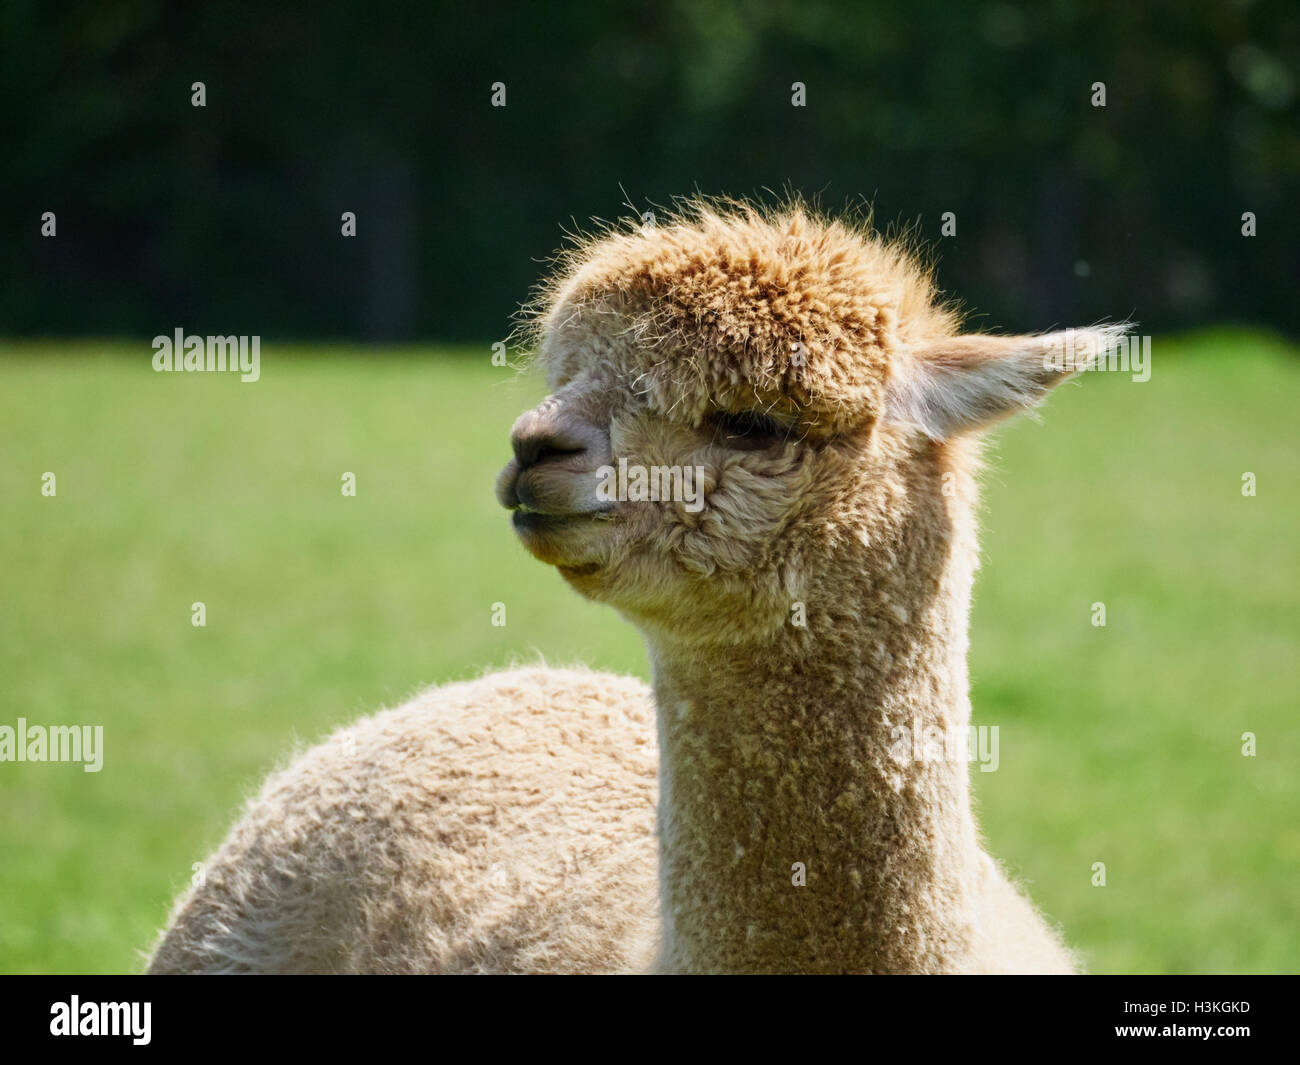 Portrait of a farmed Alpaca, Vicugna pacos, in a grass meadow in the UK. Stock Photo